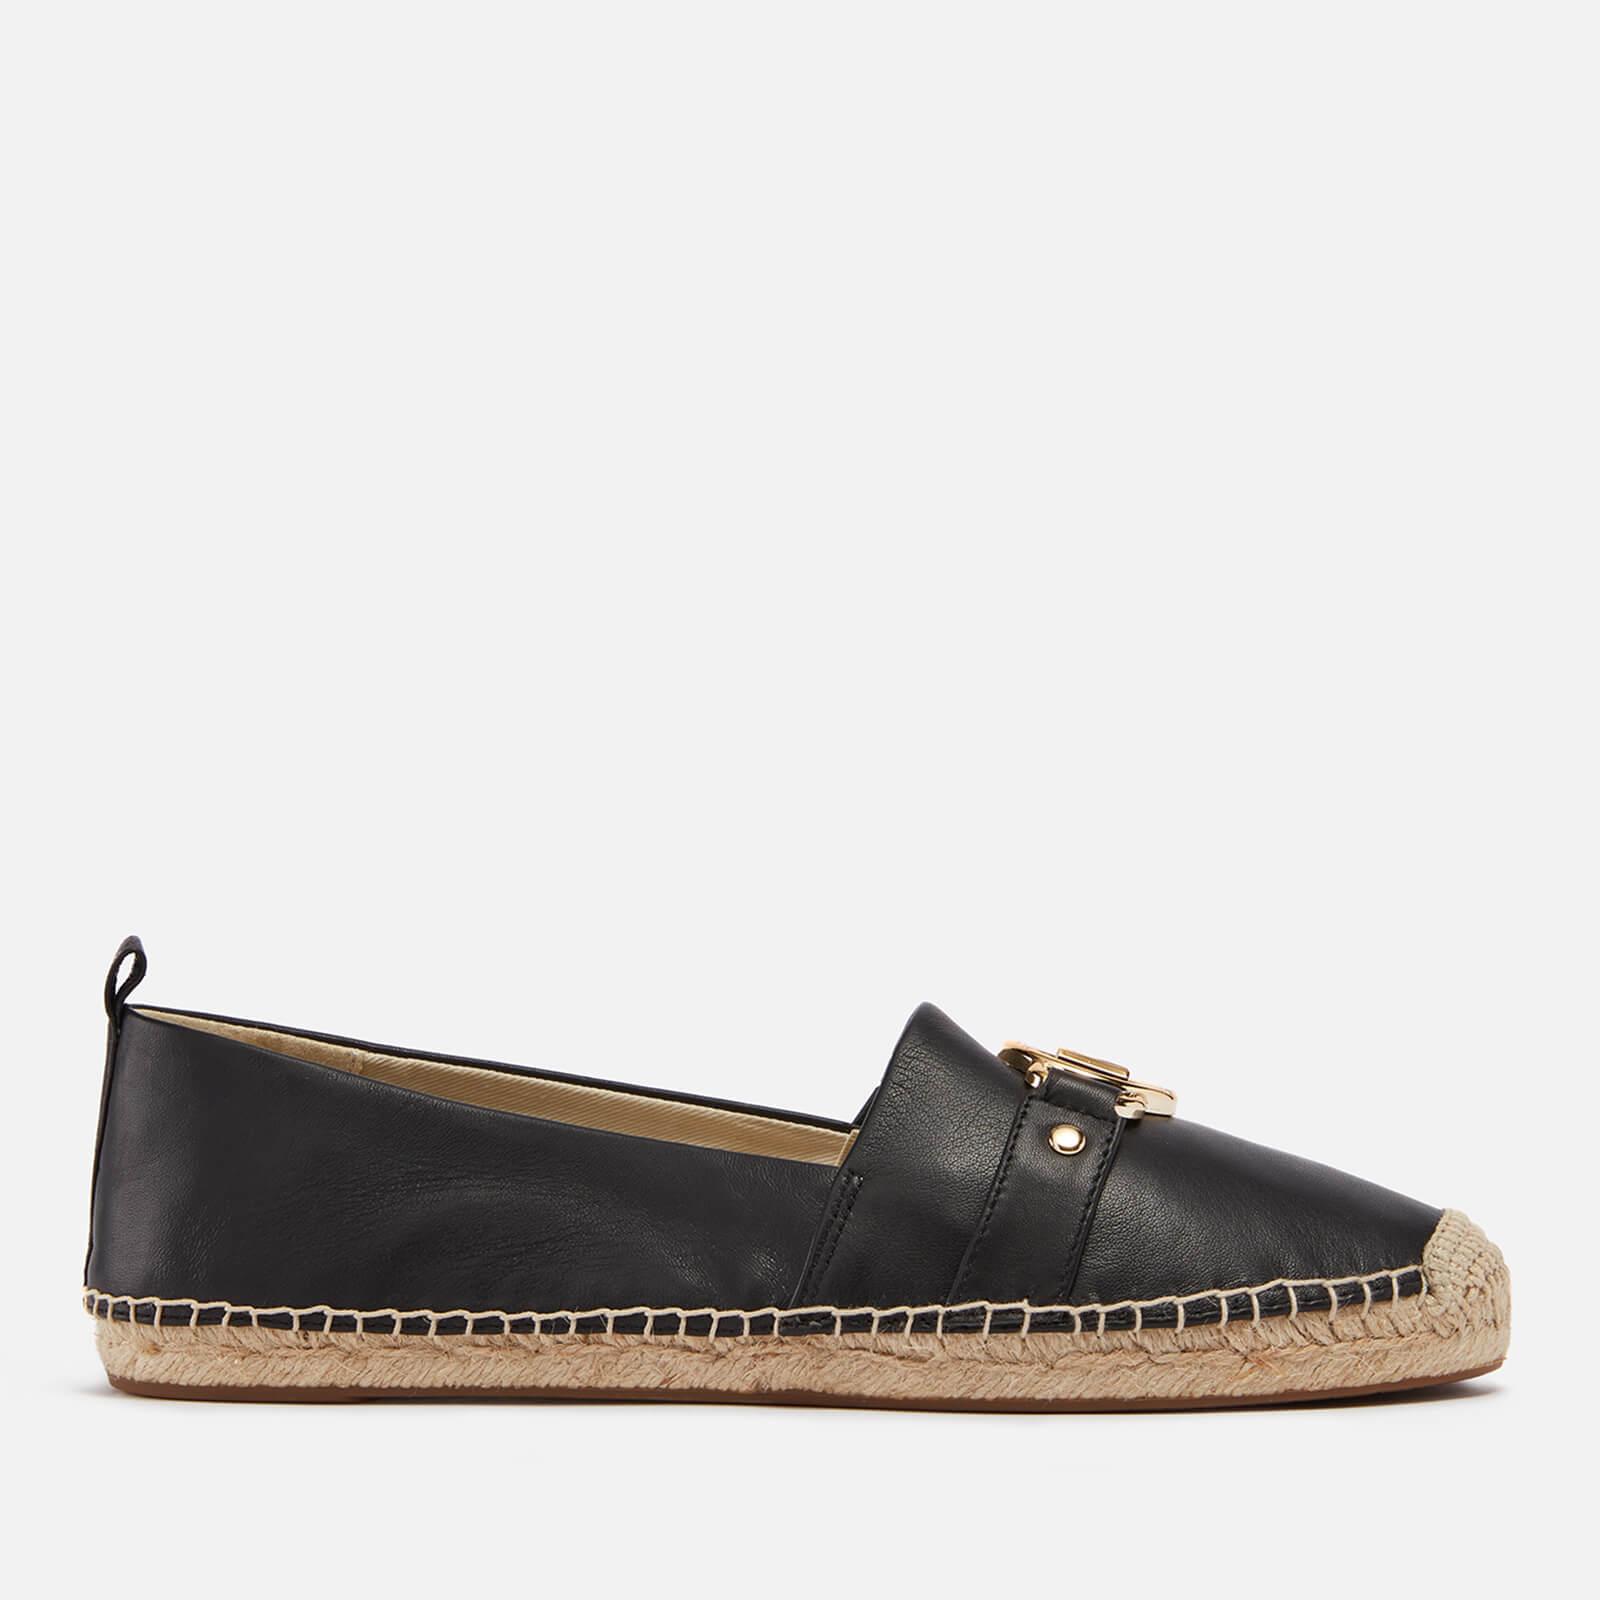 MICHAEL Michael Kors Rory Leather And Raffia Espadrilles in Black | Lyst